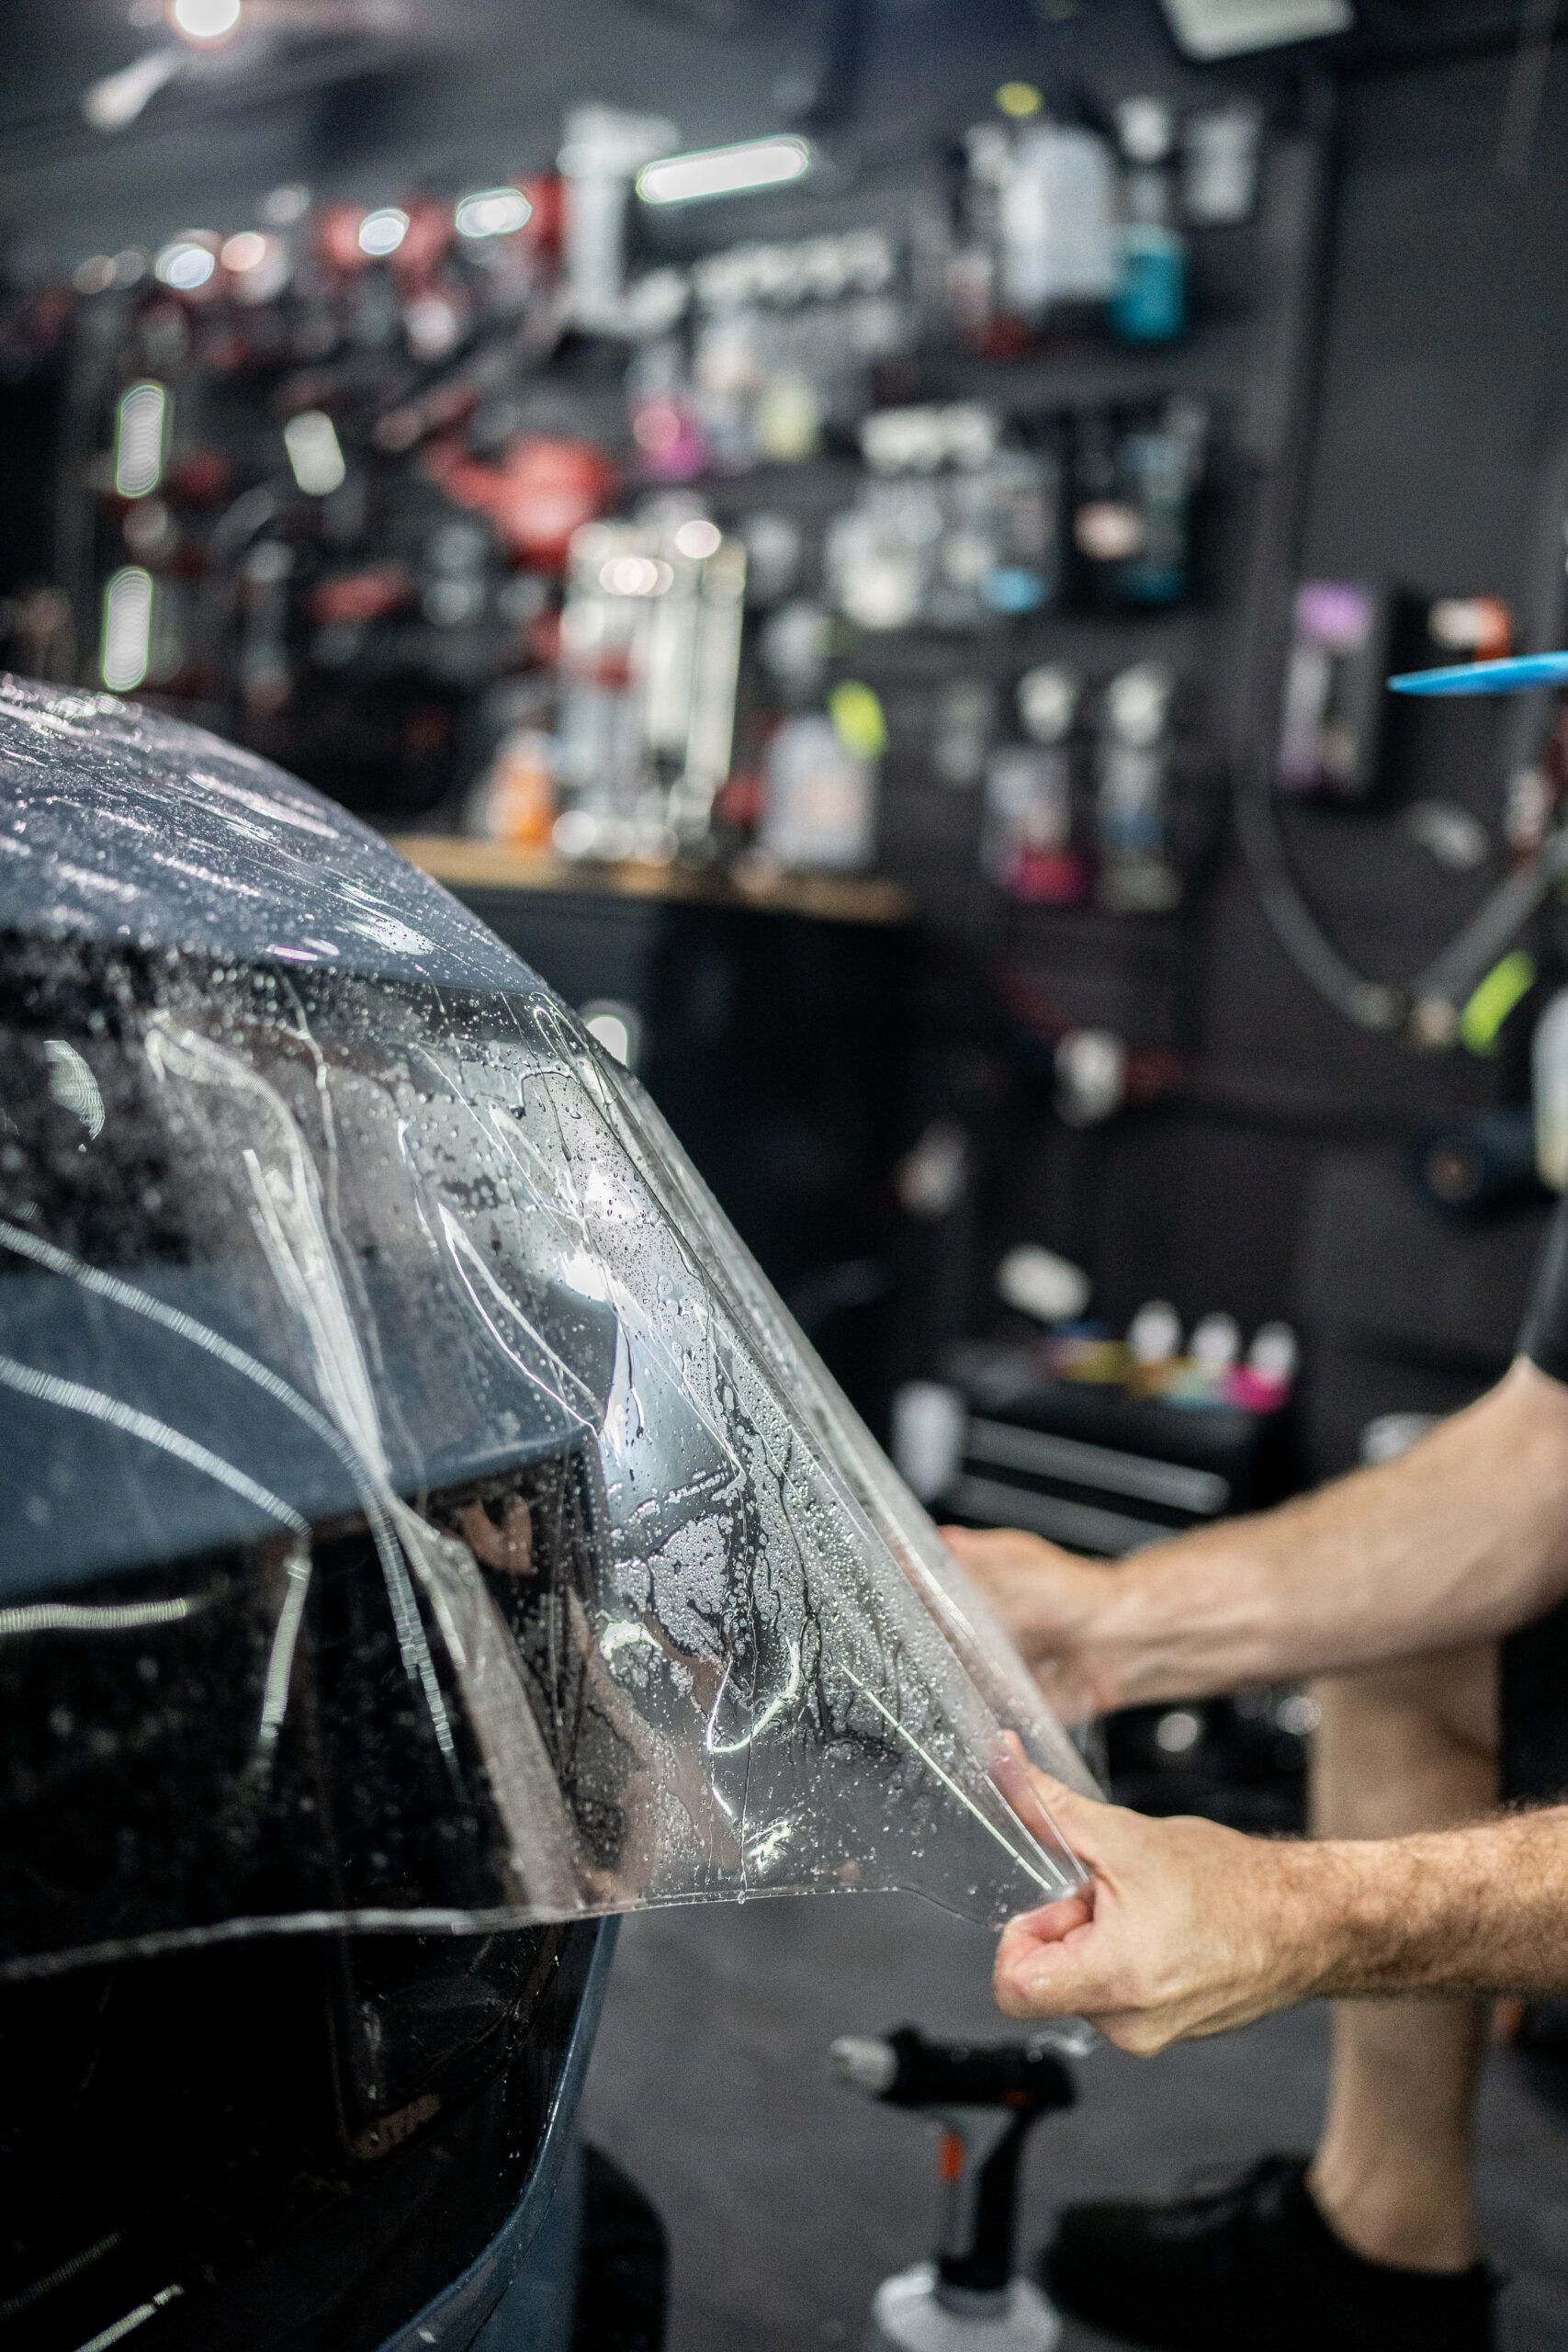 A man is applying a protective film to the windshield of a car.